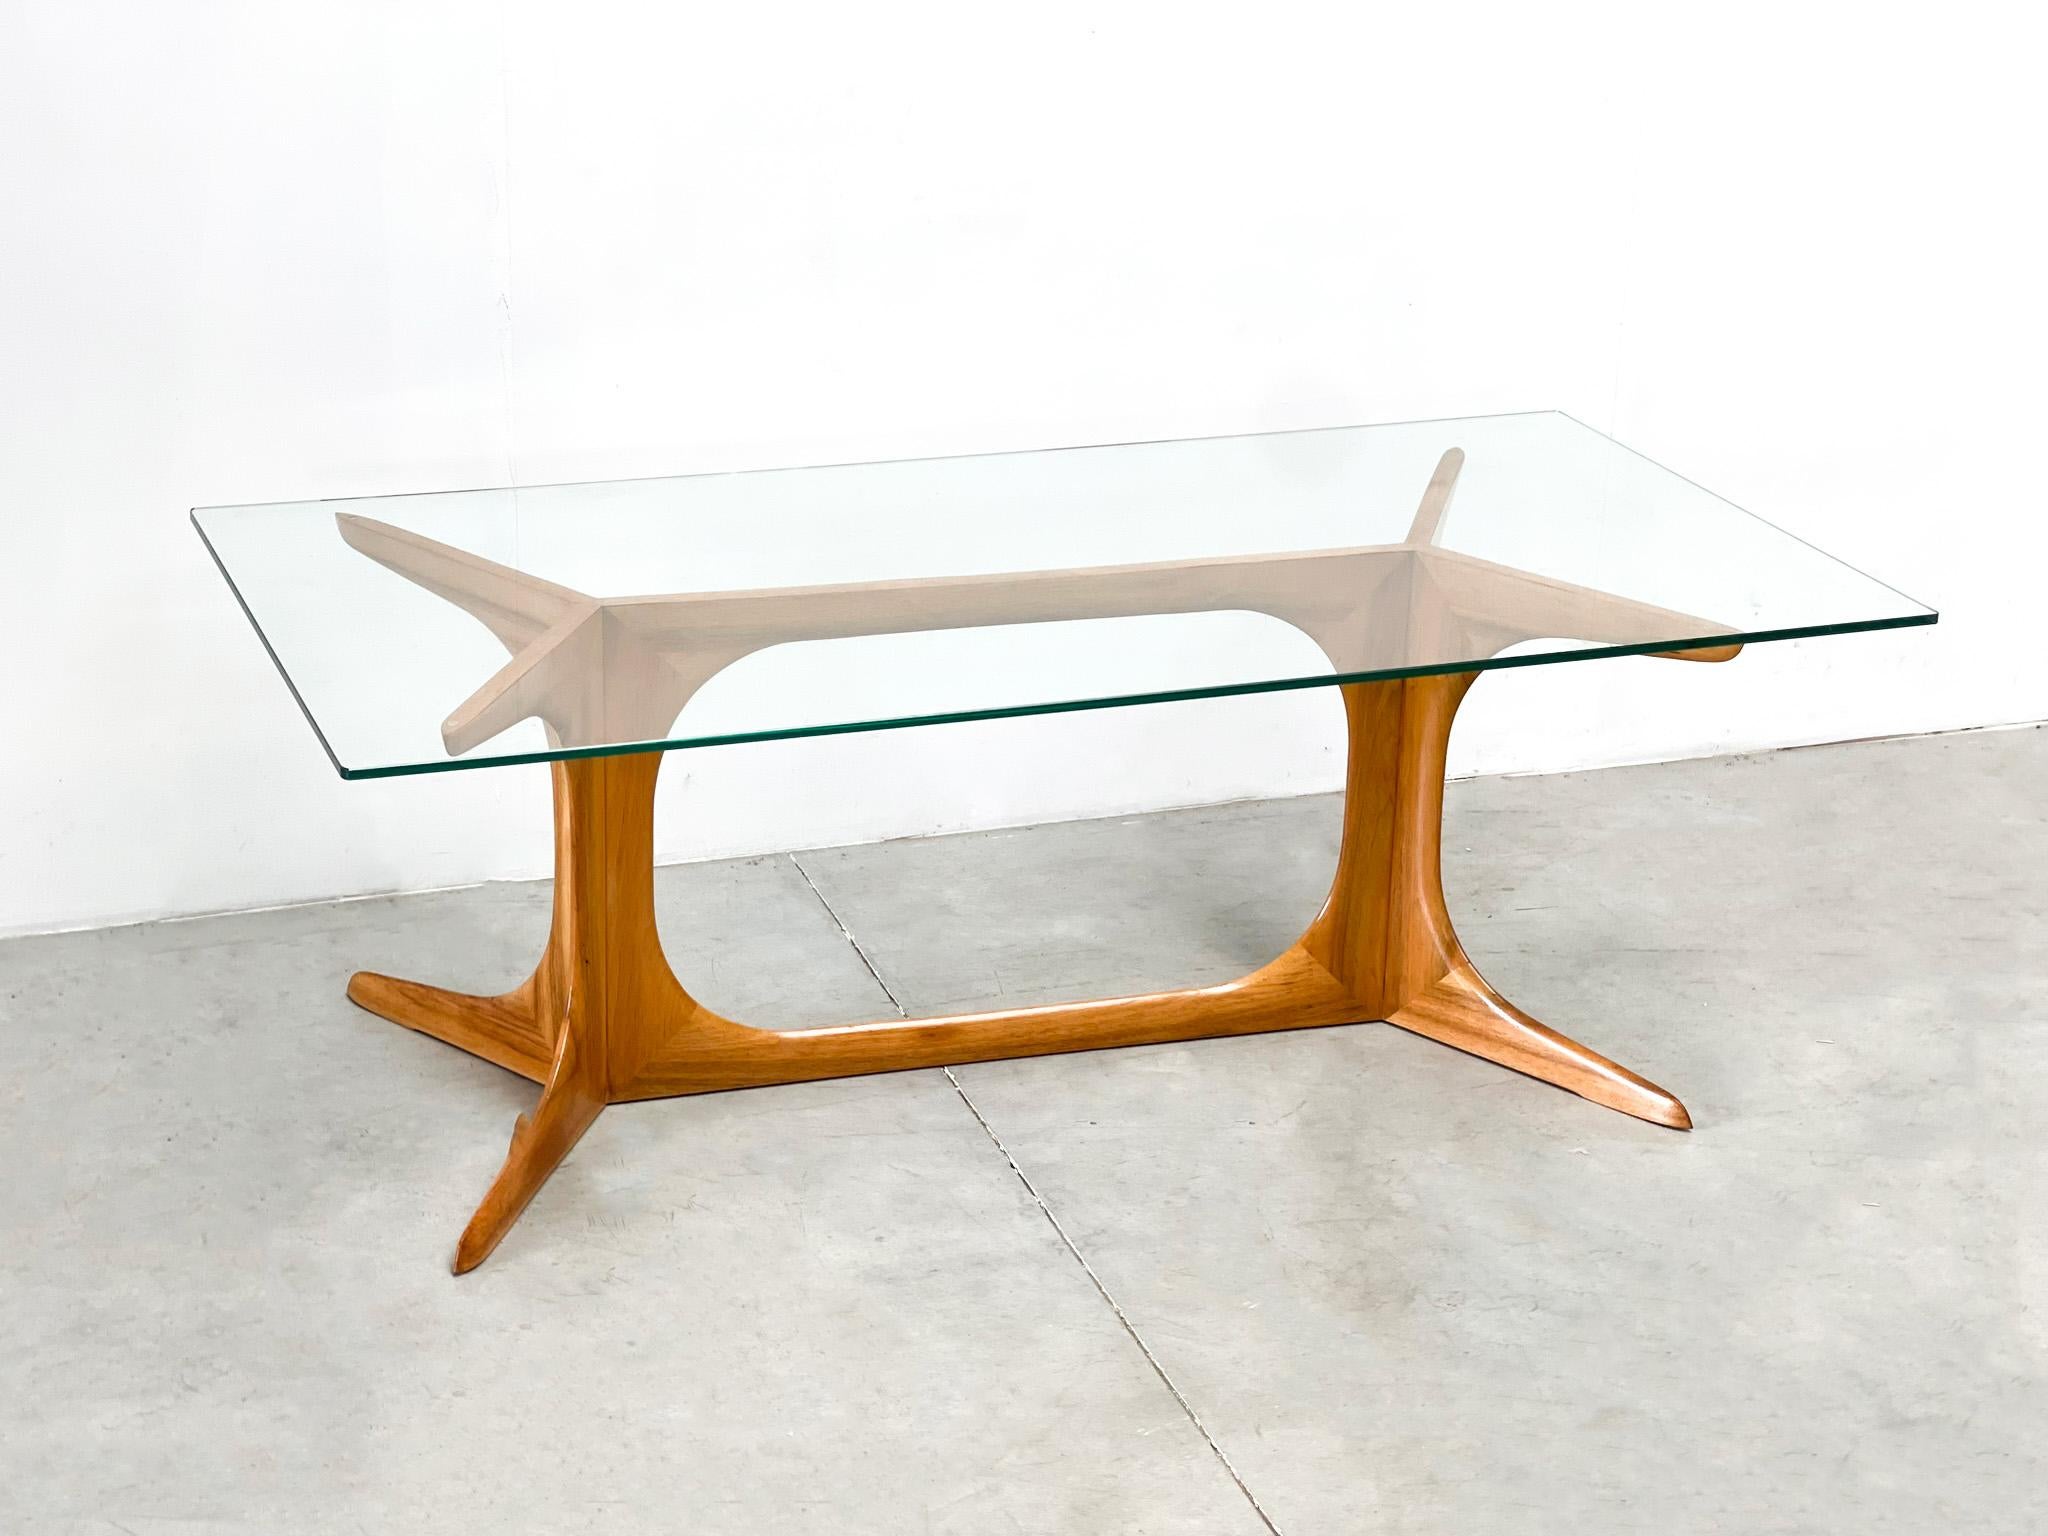 Italian elegance is what we think of when we see this coffee table. This coffee table is attributed to the famous Italian designer Ico Parisi. This is a clear example of Italian elegance and top design. A good example of Italian craftsmanship. The